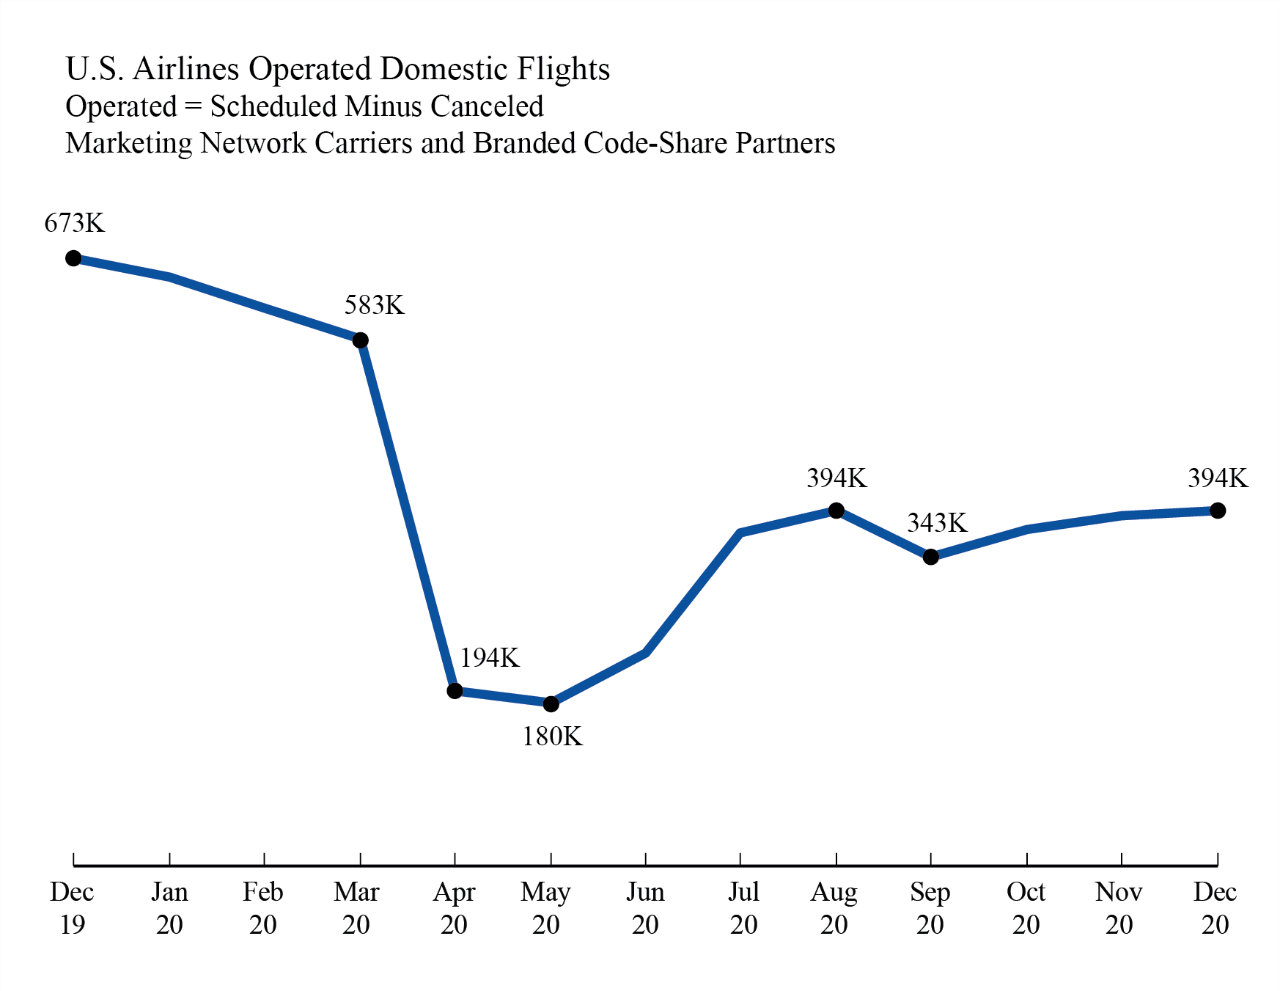 U.S Airlines Operated Domestic Flights Full Year 2020 Numbers